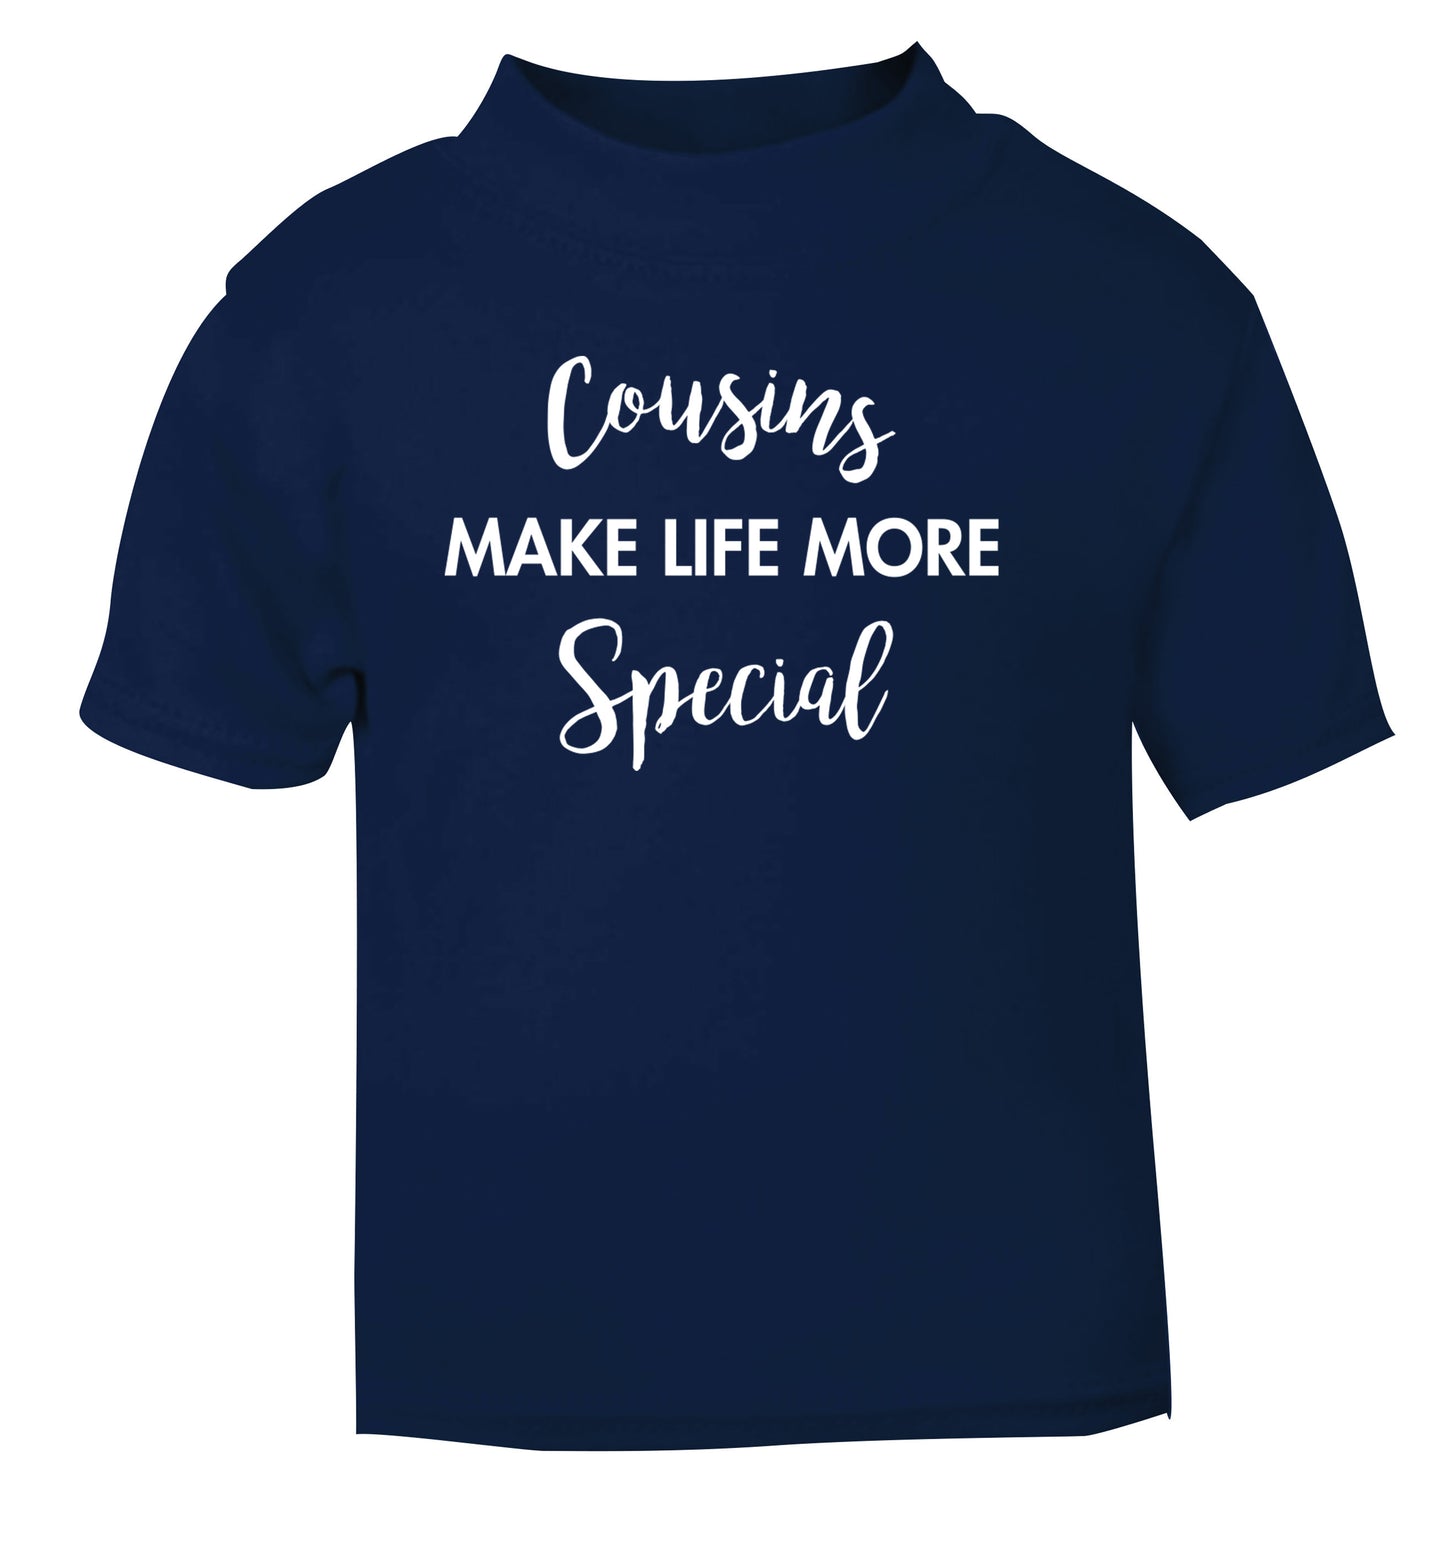 Cousins make life more special navy Baby Toddler Tshirt 2 Years